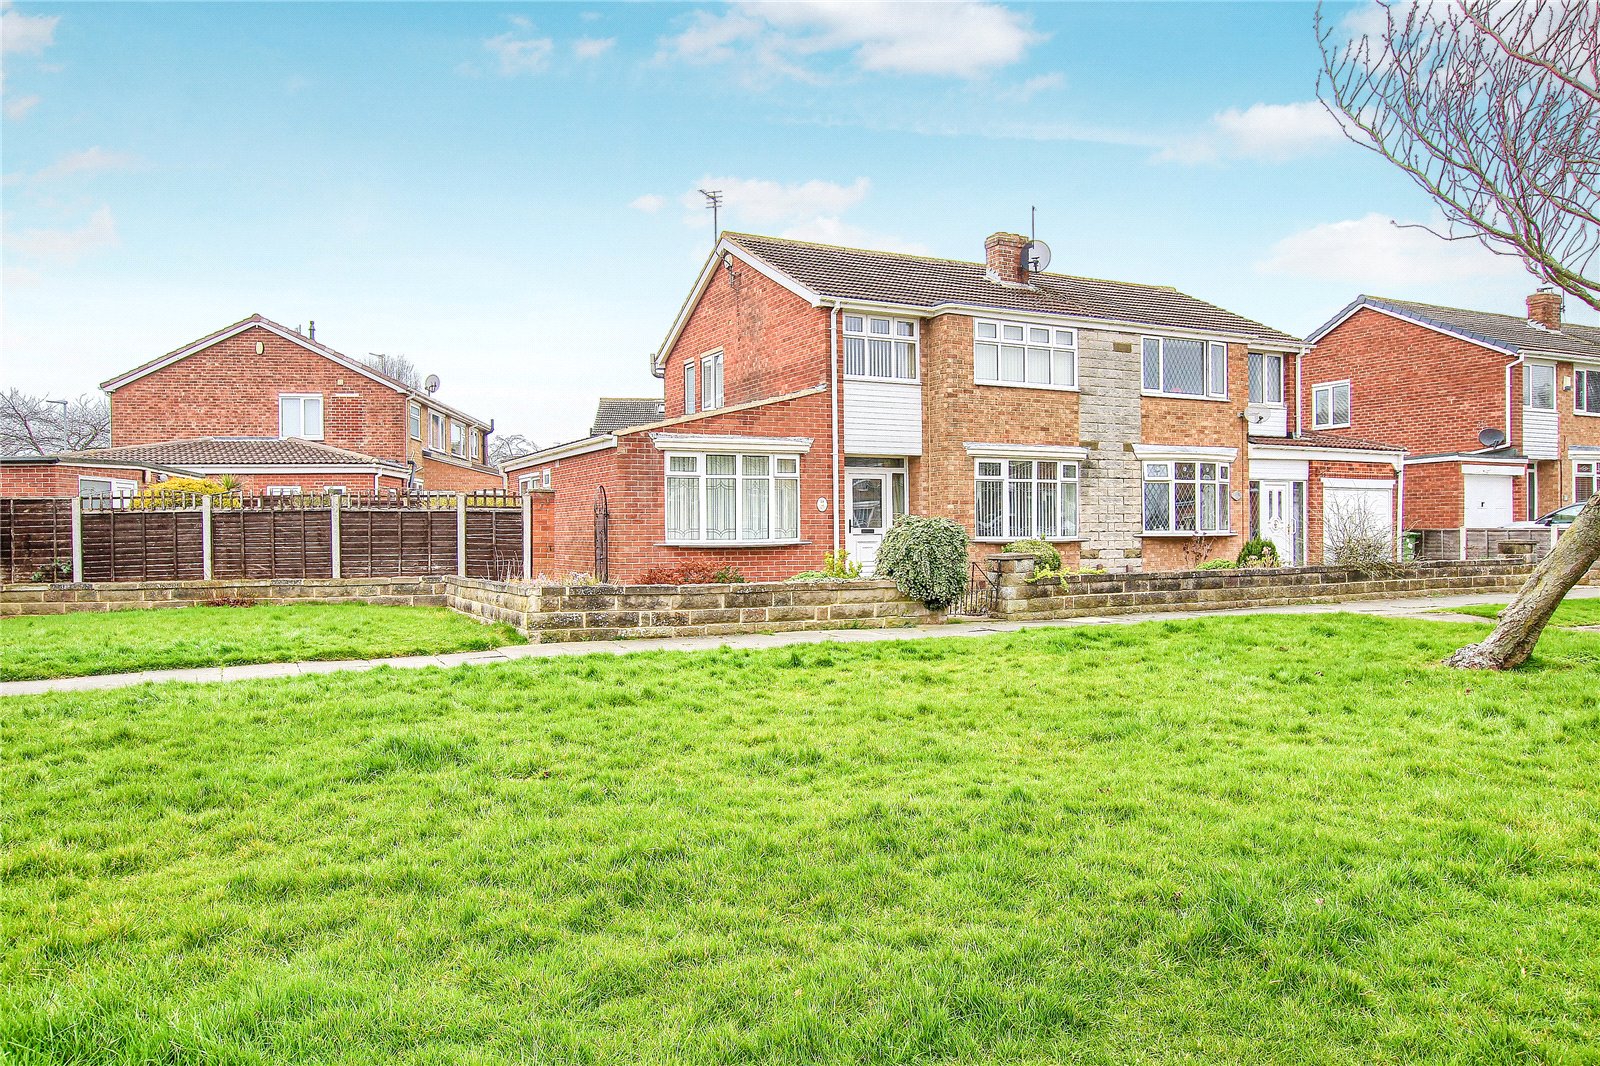 4 bed house for sale in Wolviston Court, Billingham - Property Image 1